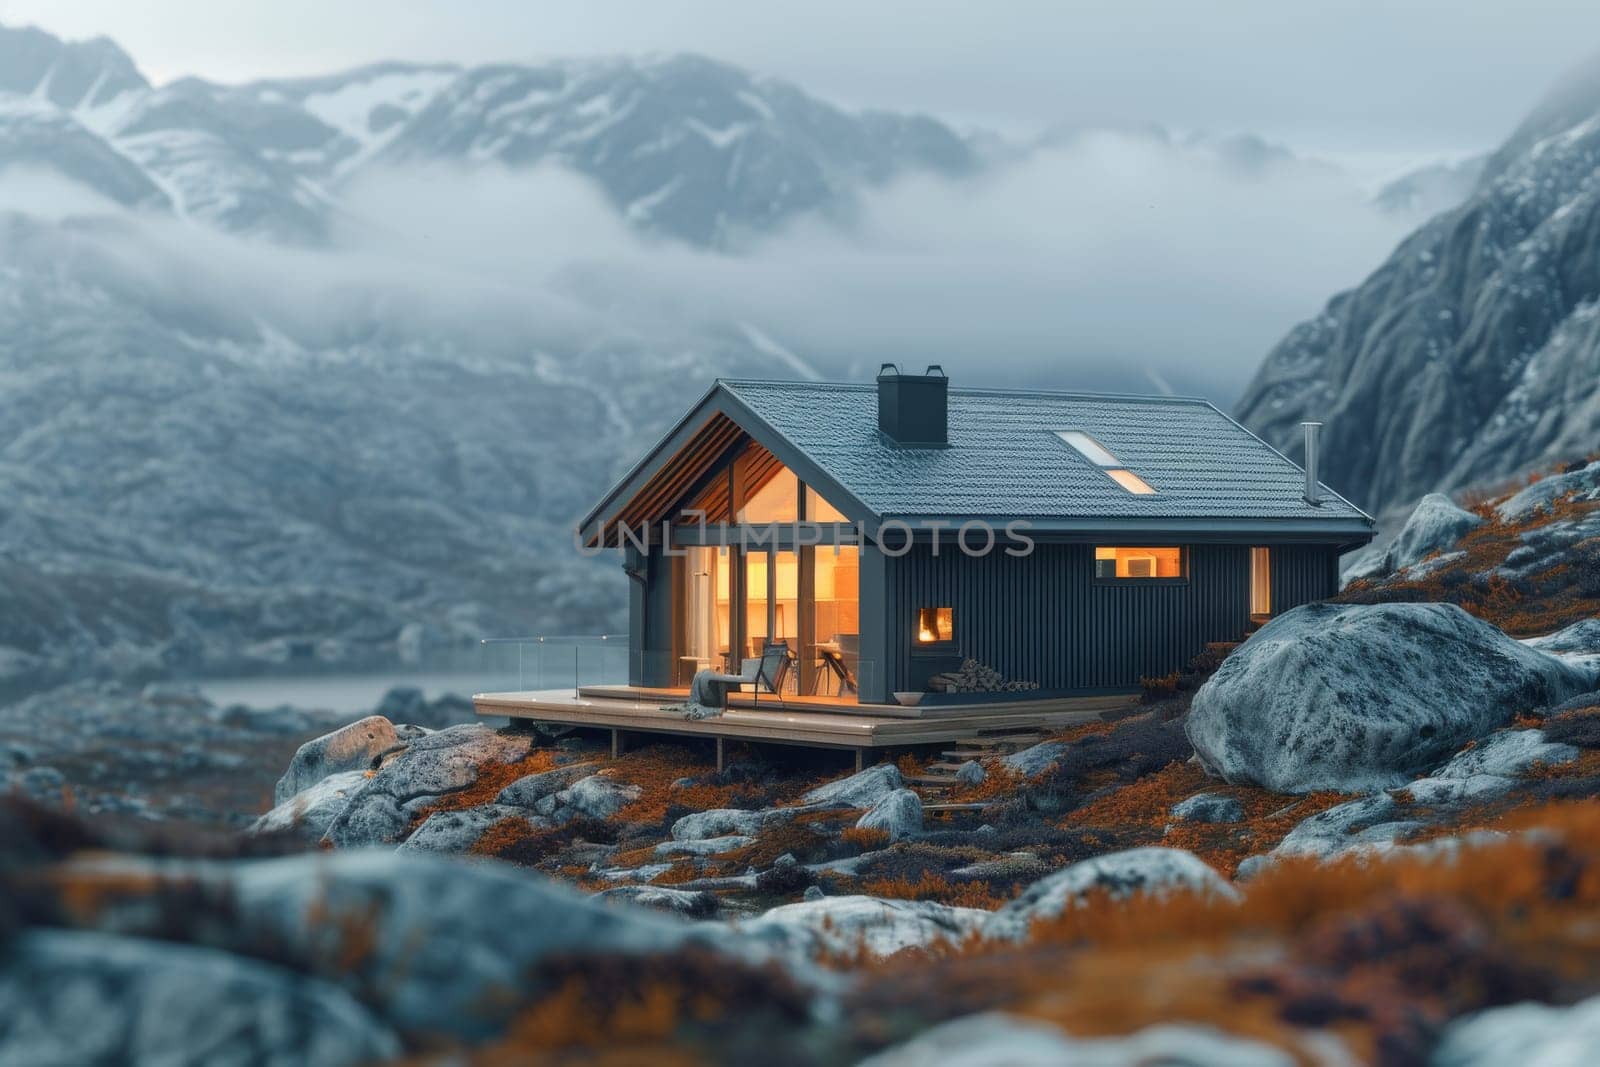 A small house is on a rocky hillside with a lake in the background. The house is surrounded by rocks and the landscape is mostly barren